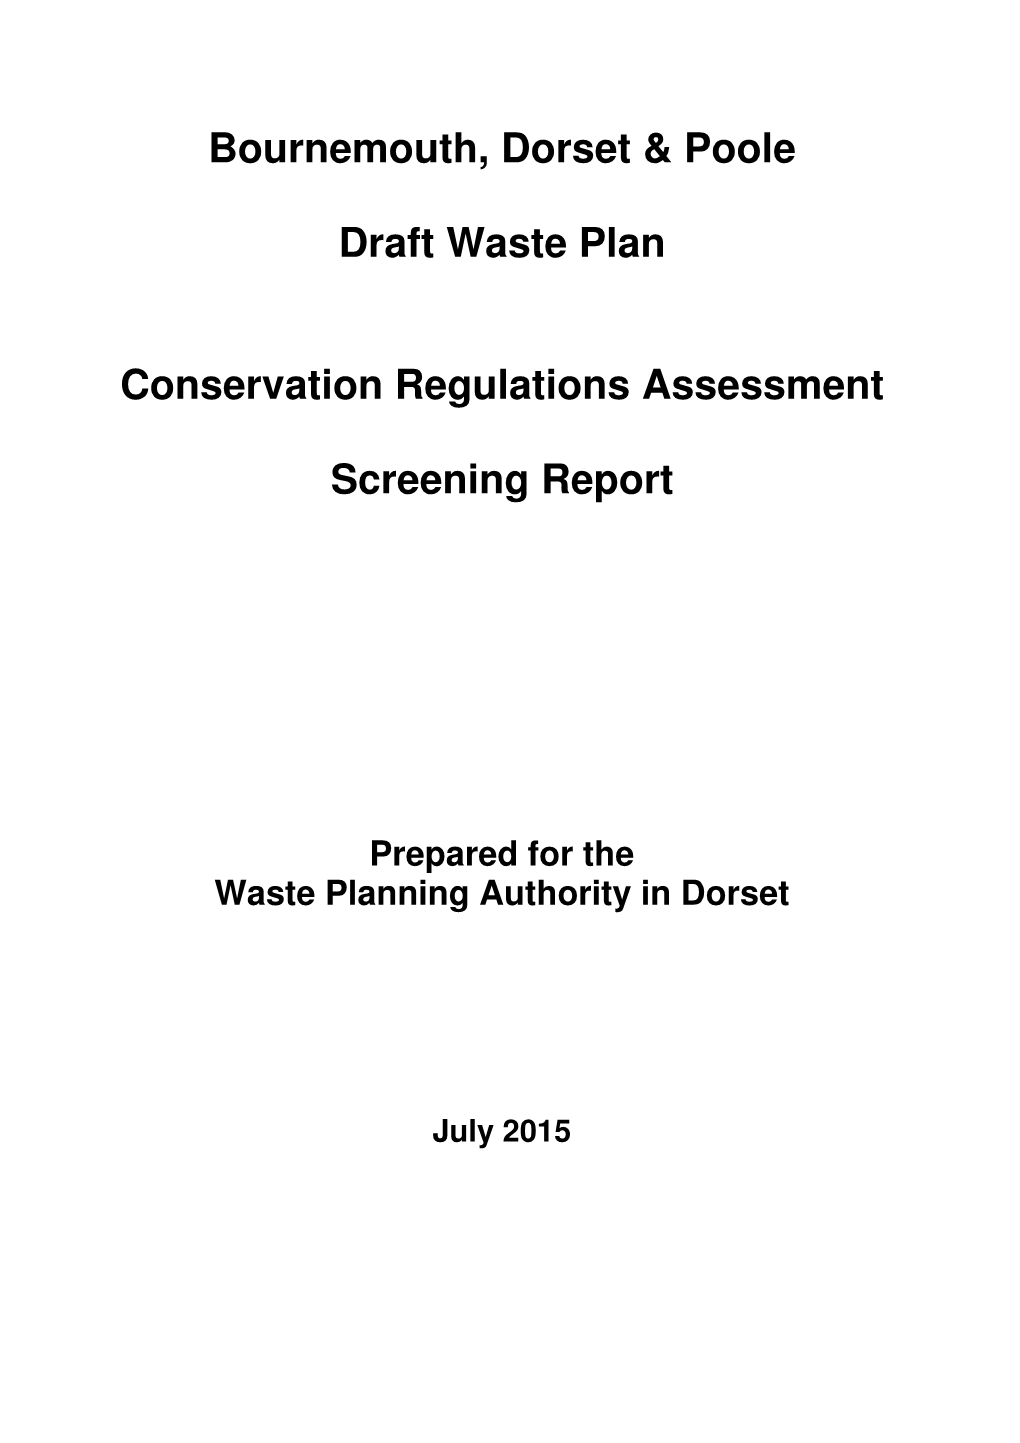 WPDCC-58 HRA Screening Report for Draft Waste